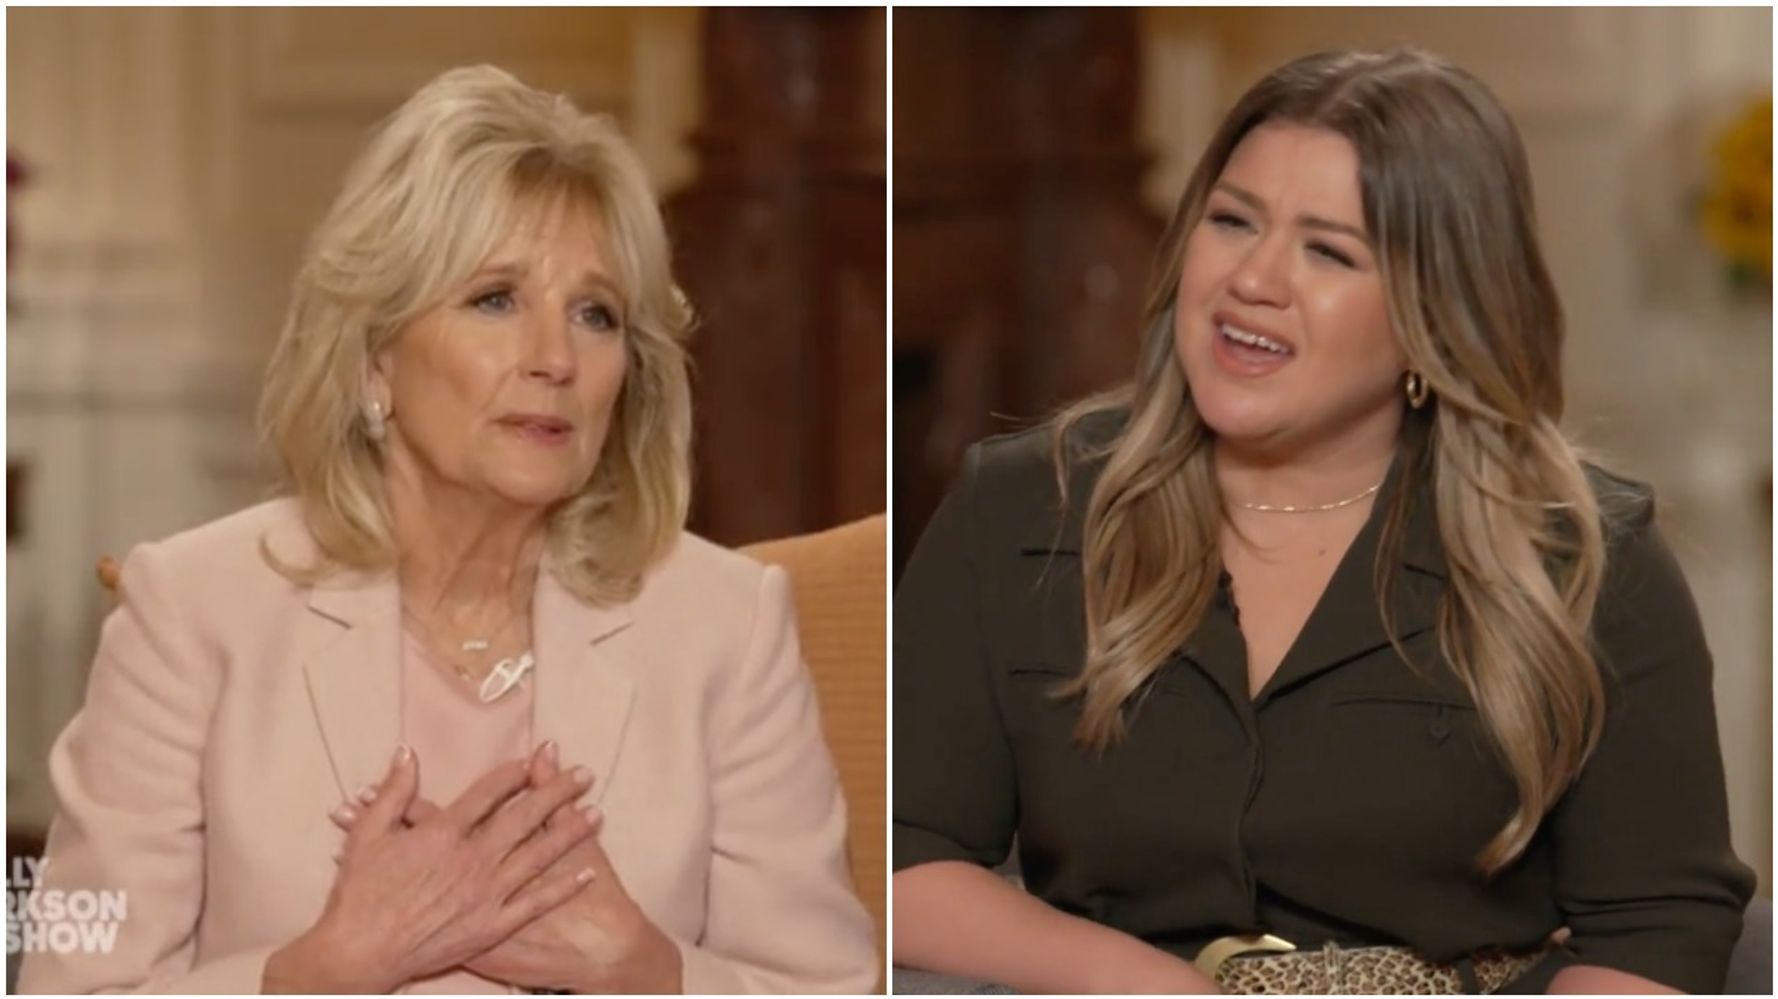 Jill Biden offers advice to Kelly Clarkson on how to overcome divorce